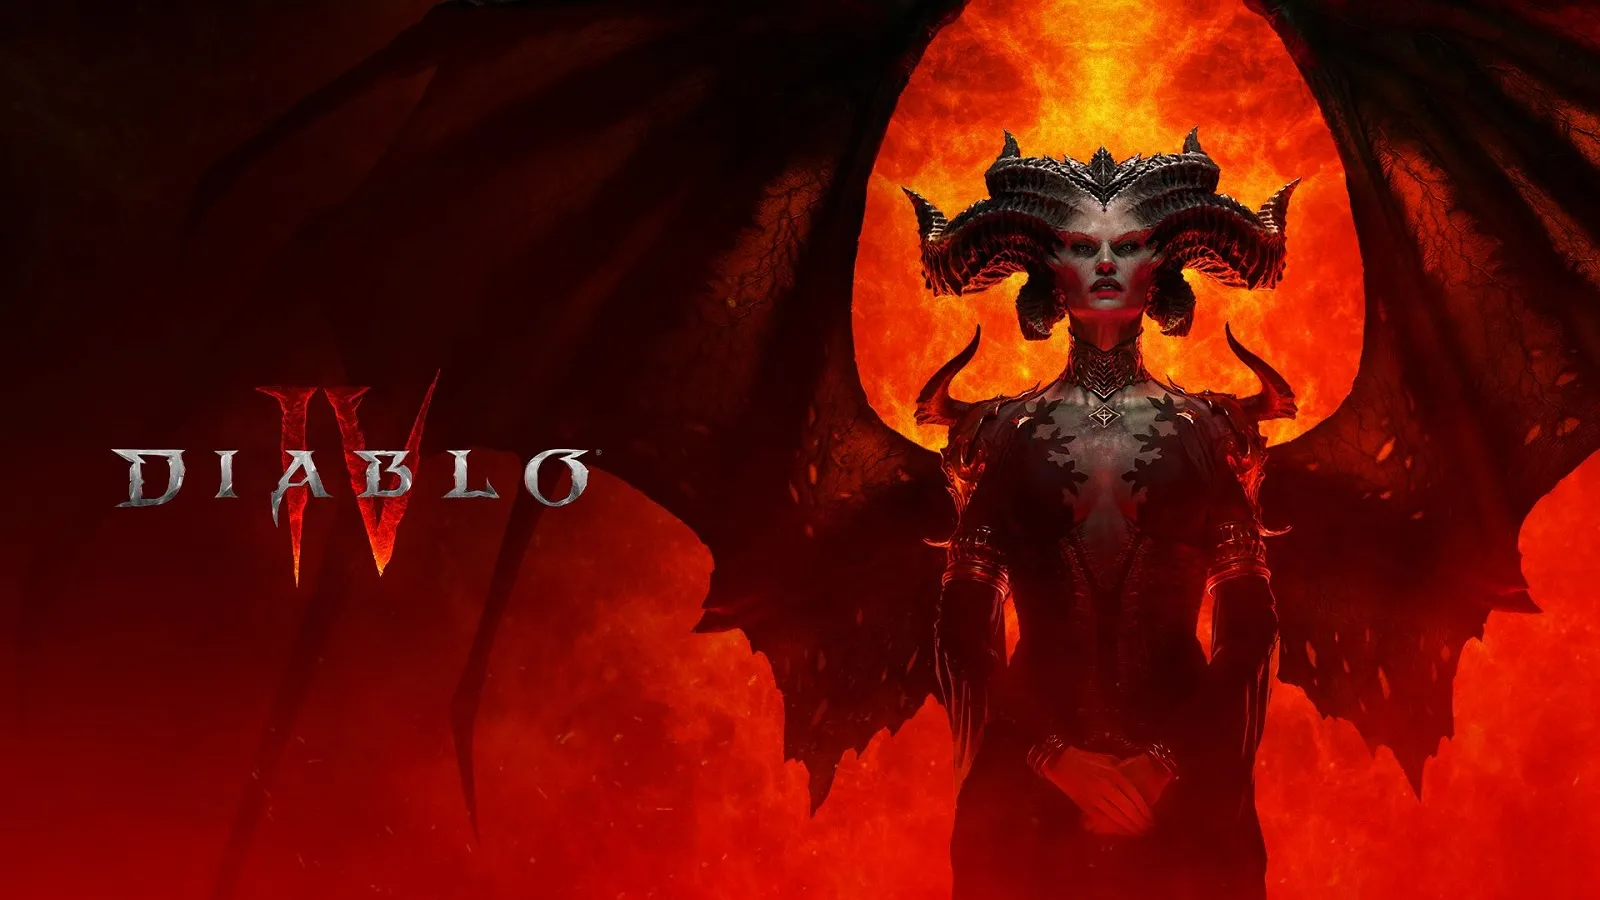 Diablo 4 is coming to Xbox Game Pass very soon